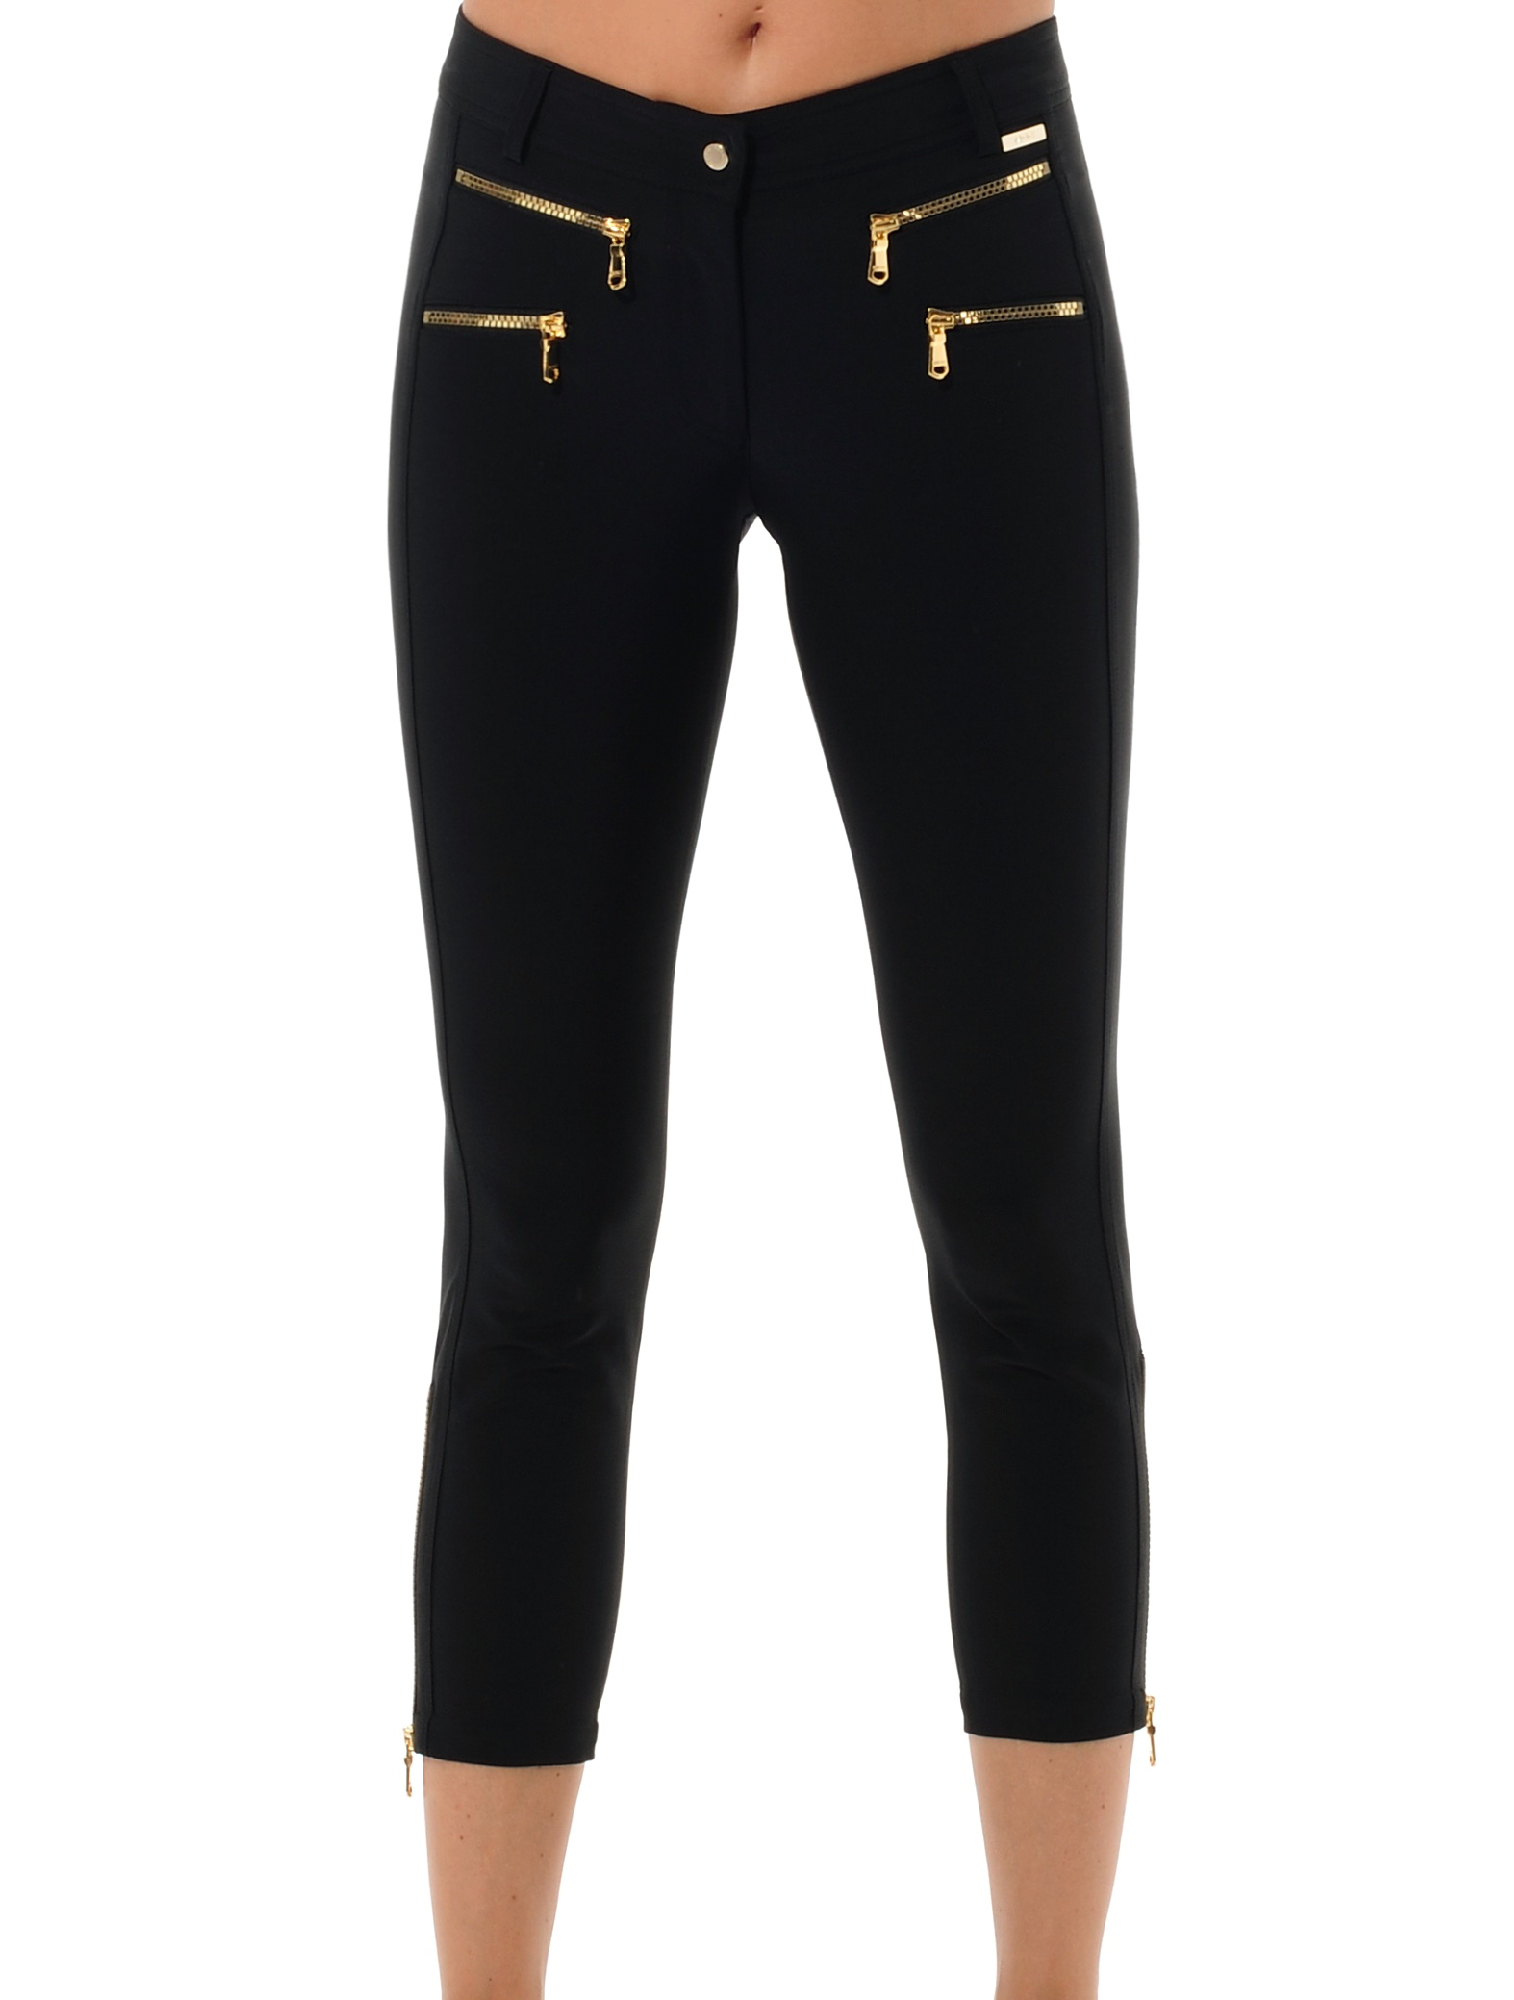 4way stretch shiny gold cube double zip cropped pants black 